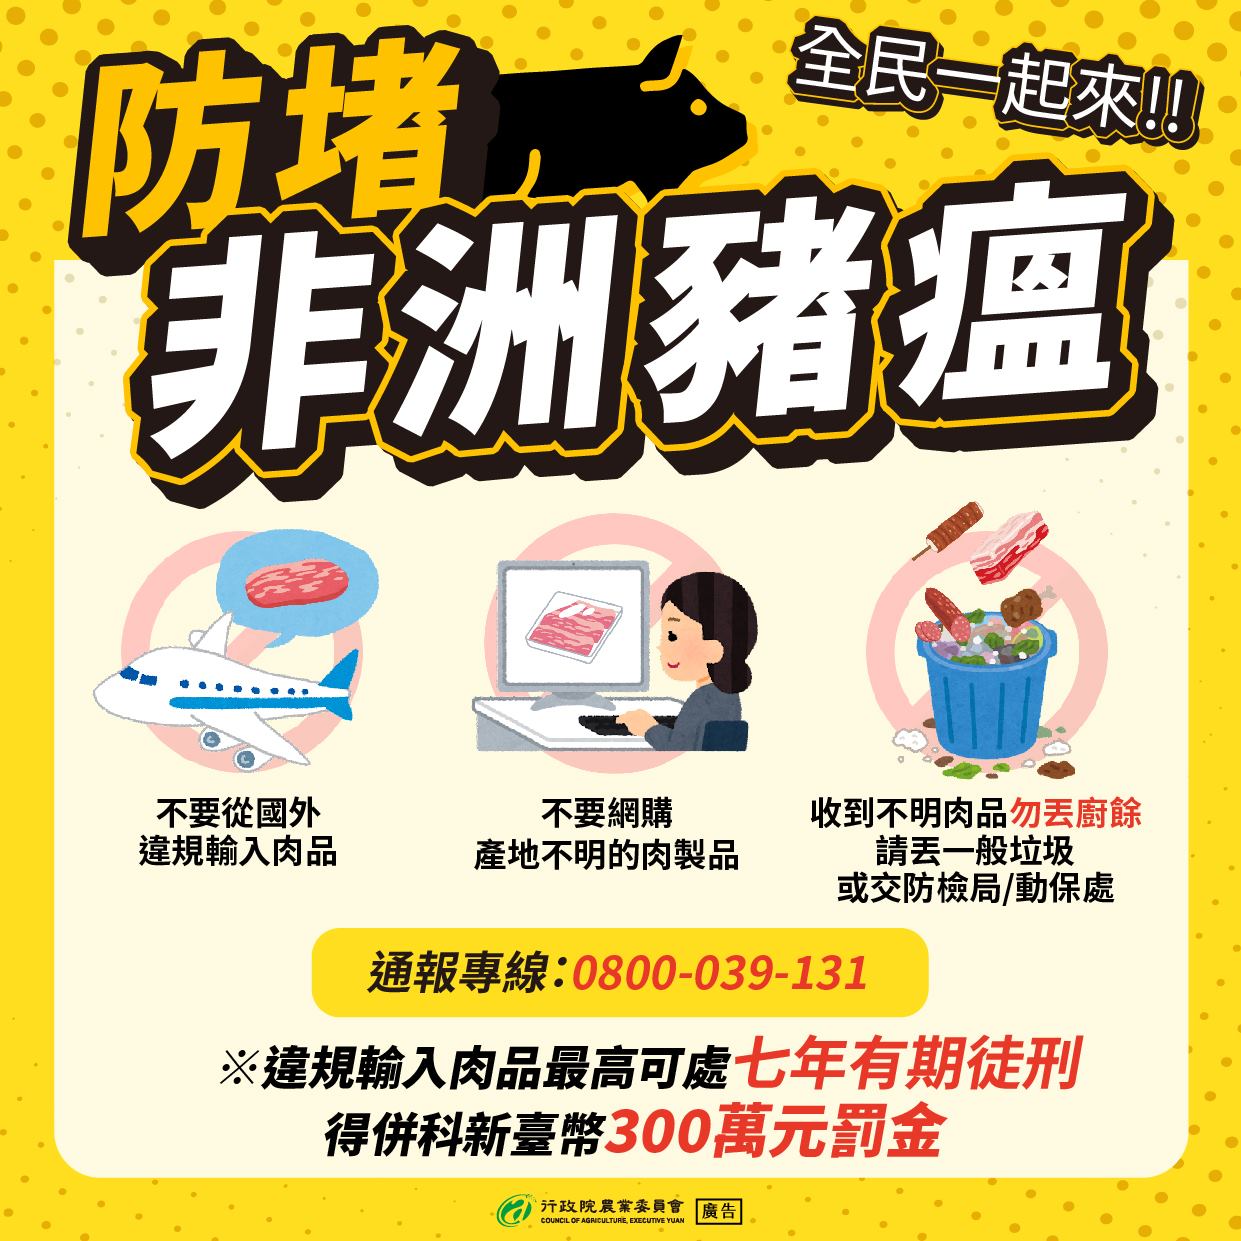 People are reminded not to bring meat products into the country and not to buy meat products online. Photo/provided by the Council of Agriculture